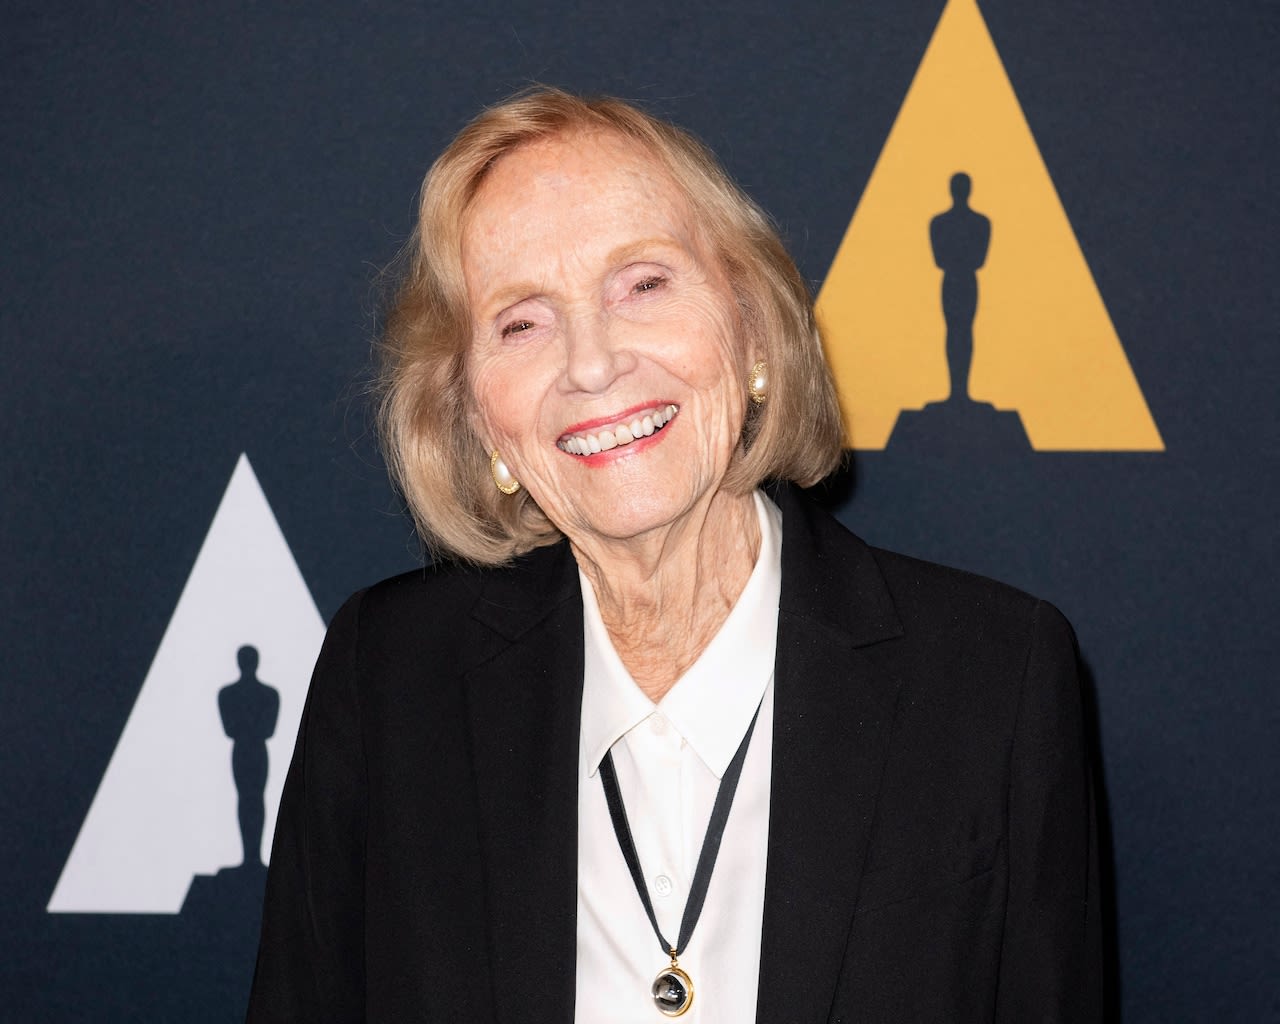 Oscar-winning actress who grew up in Upstate NY turns 100